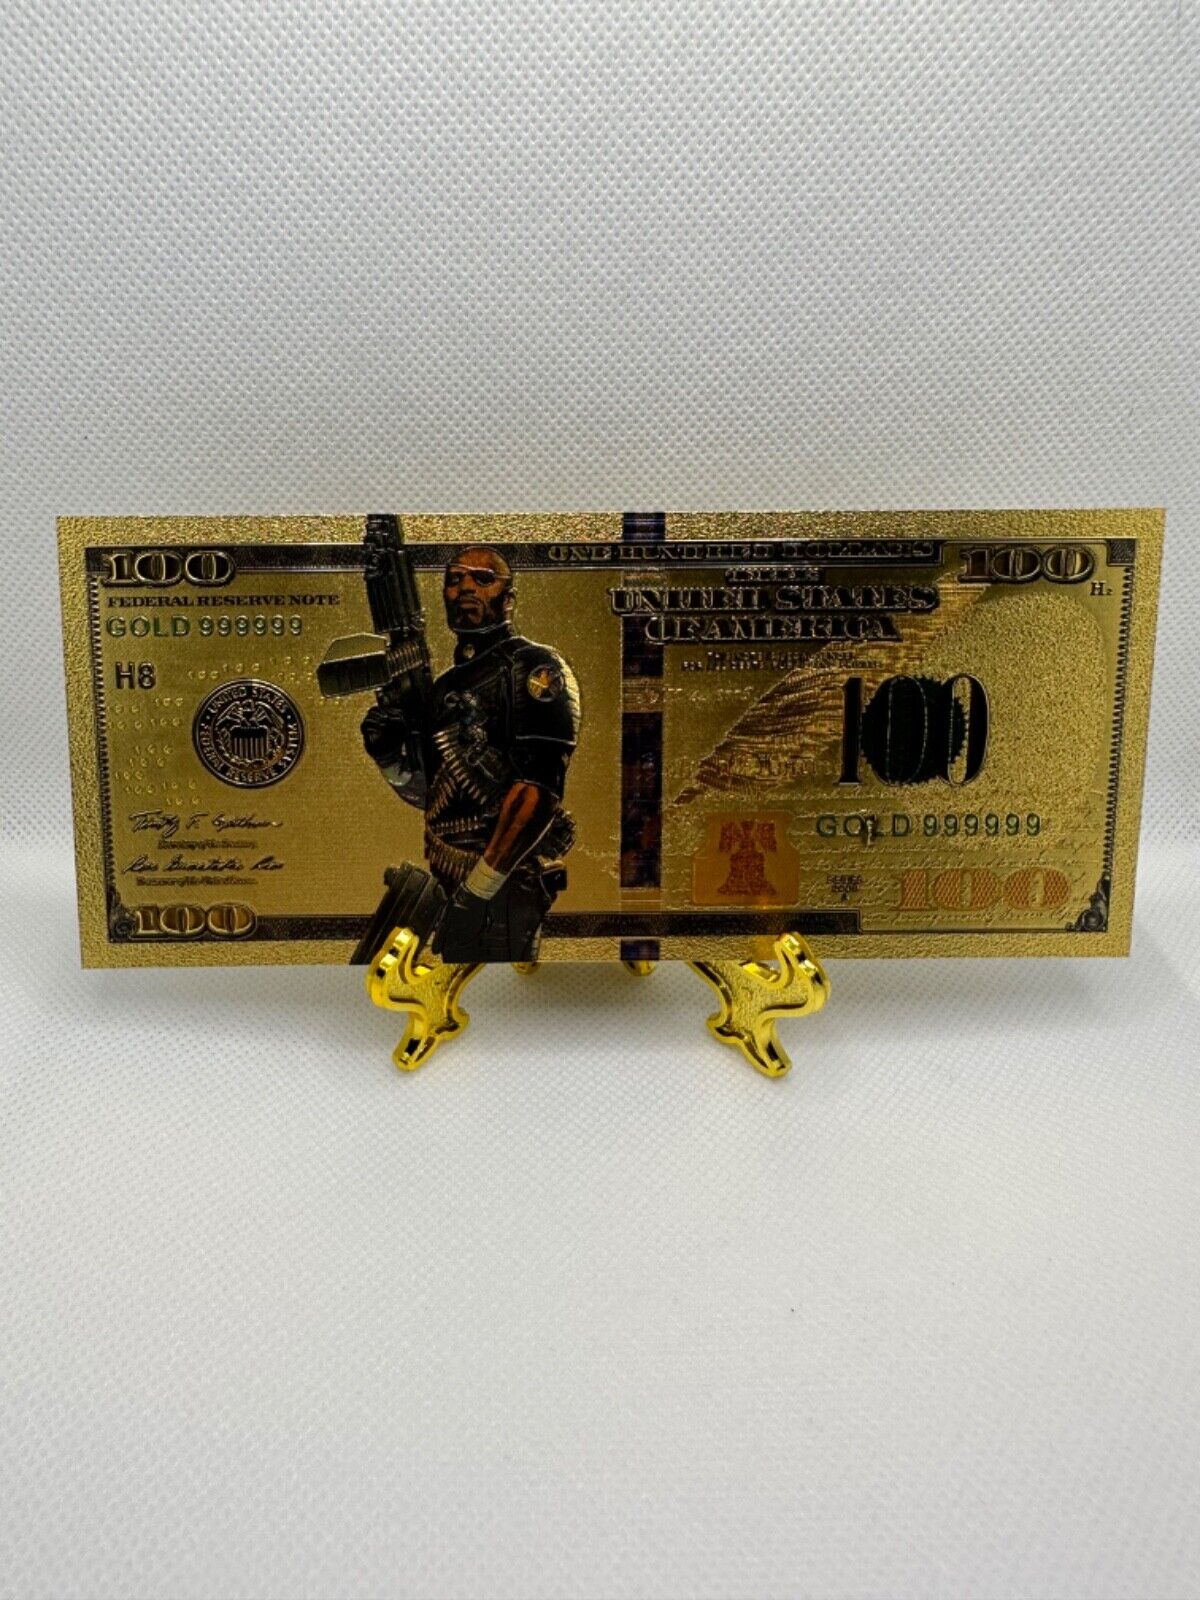 Collectible Gold Foil/Plated Marvel Avengers Bill